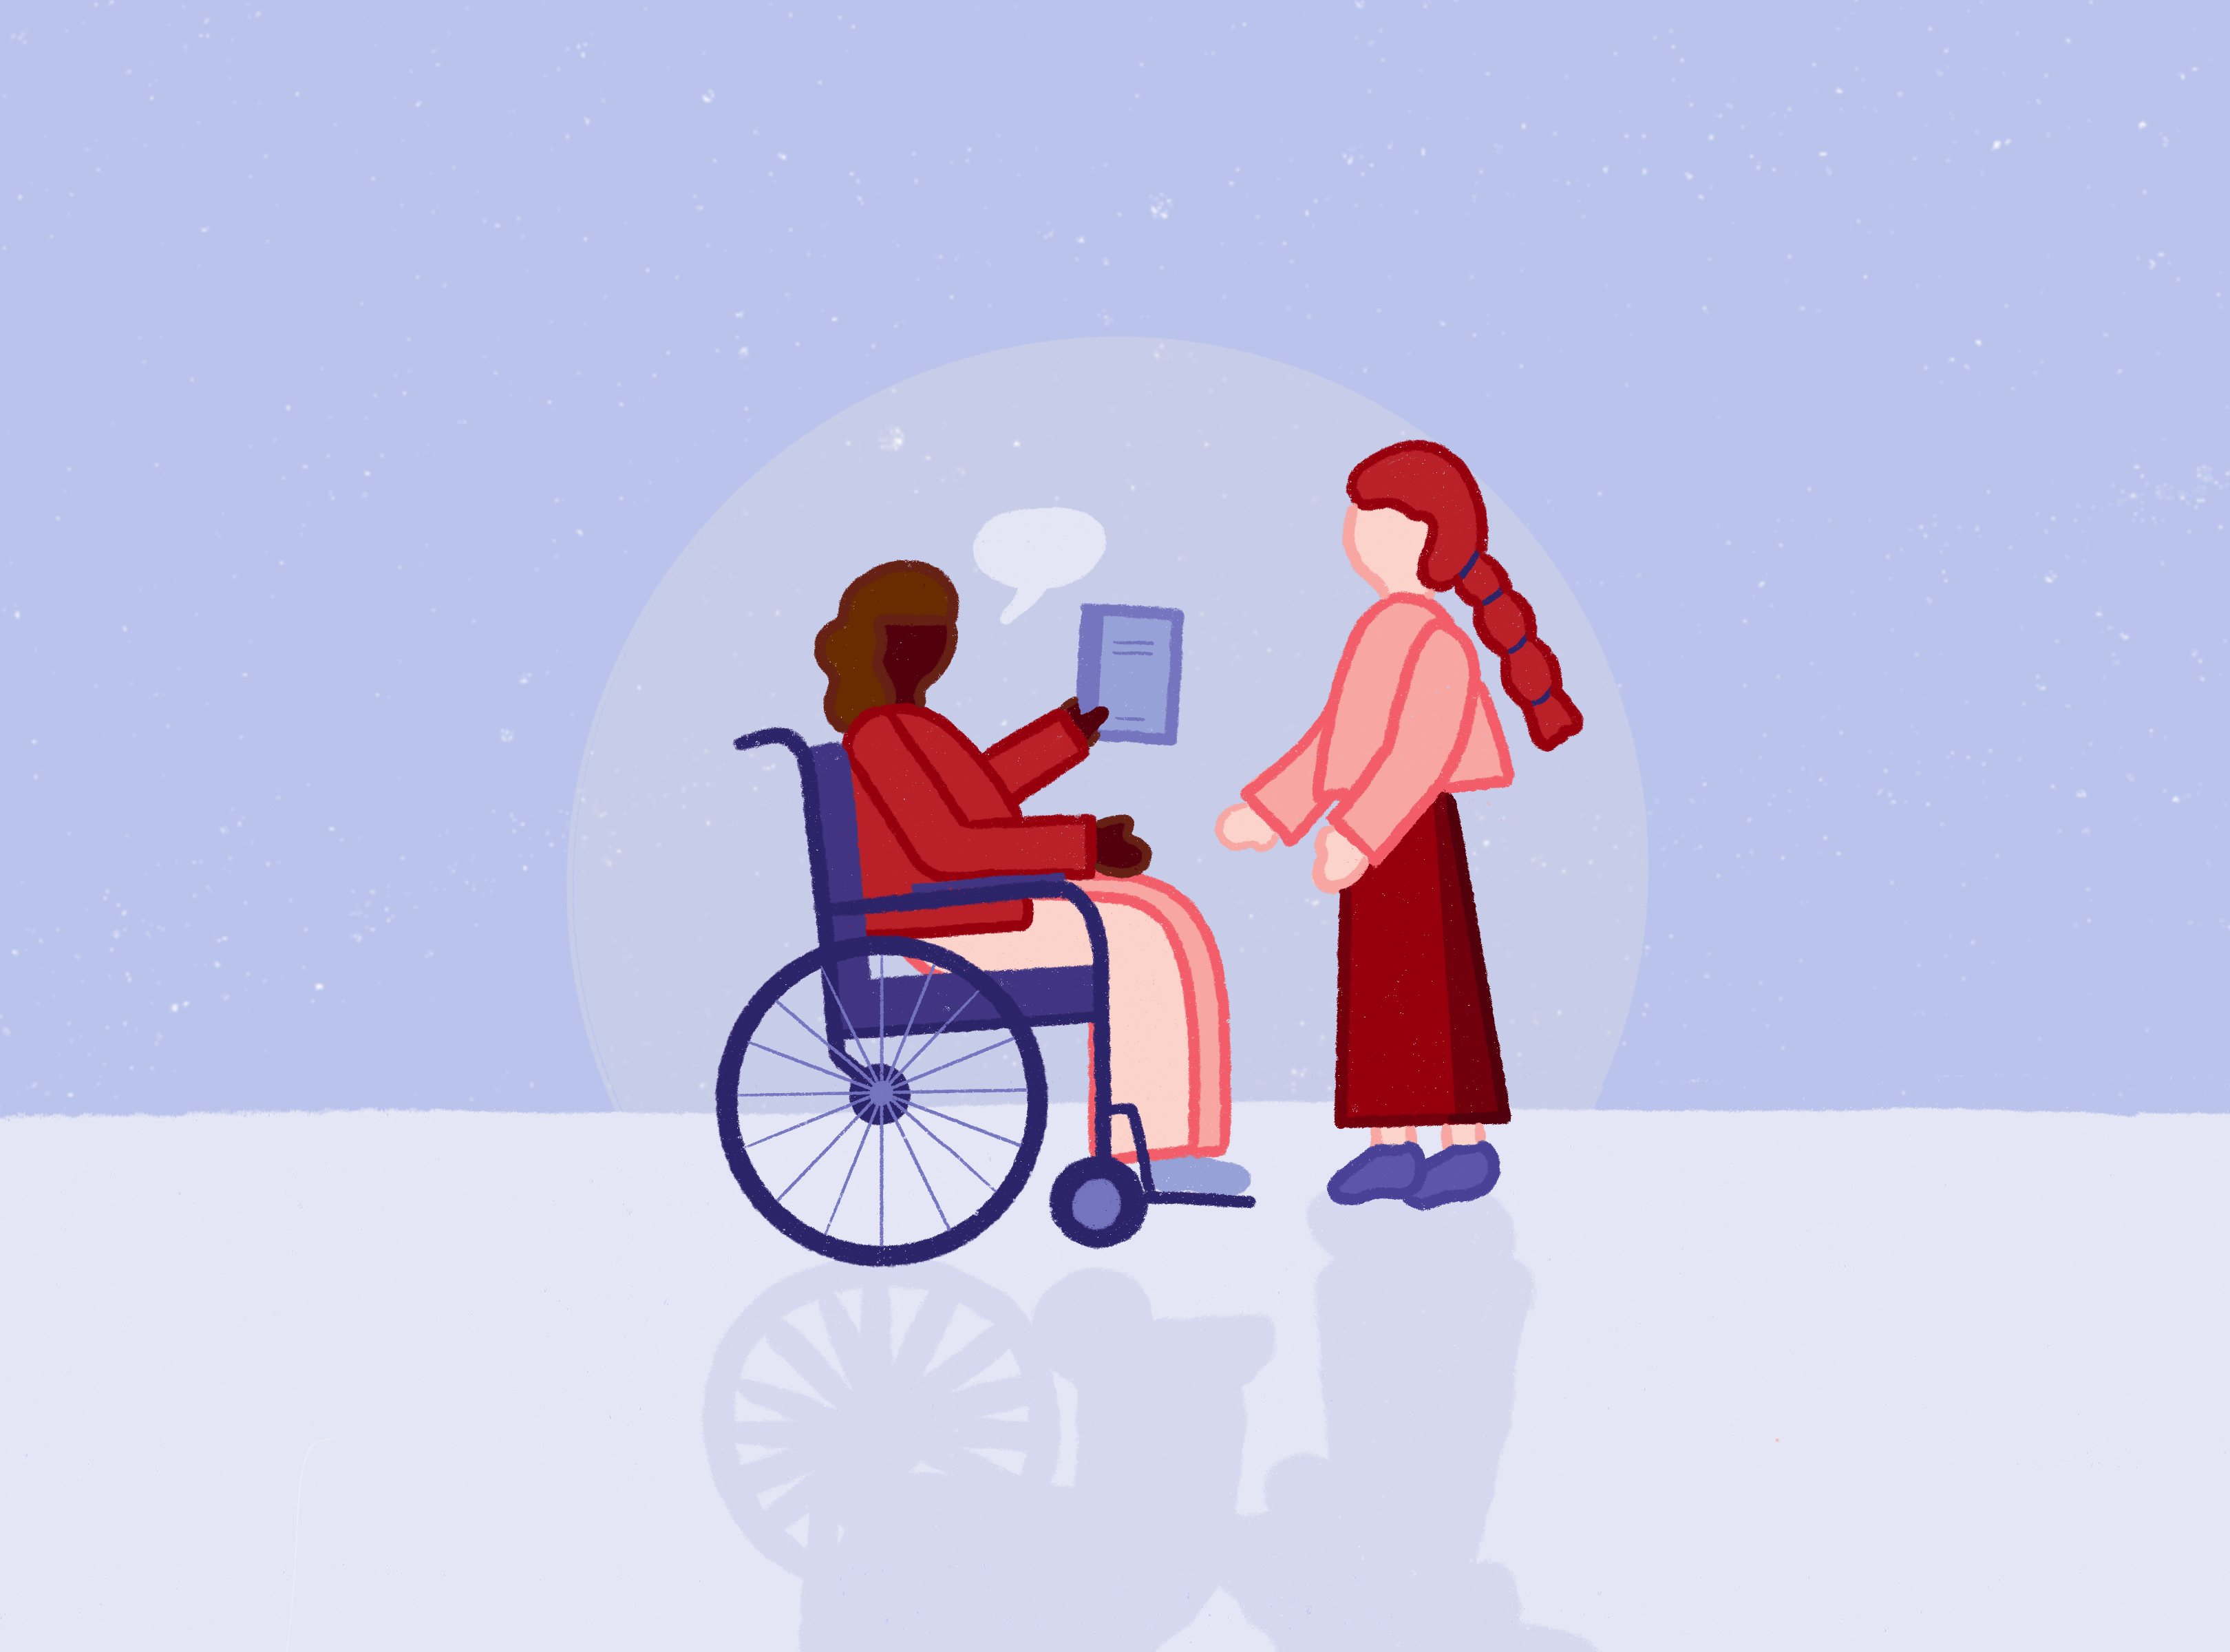 Two women, one standing and one in a wheelchair, discuss a book.